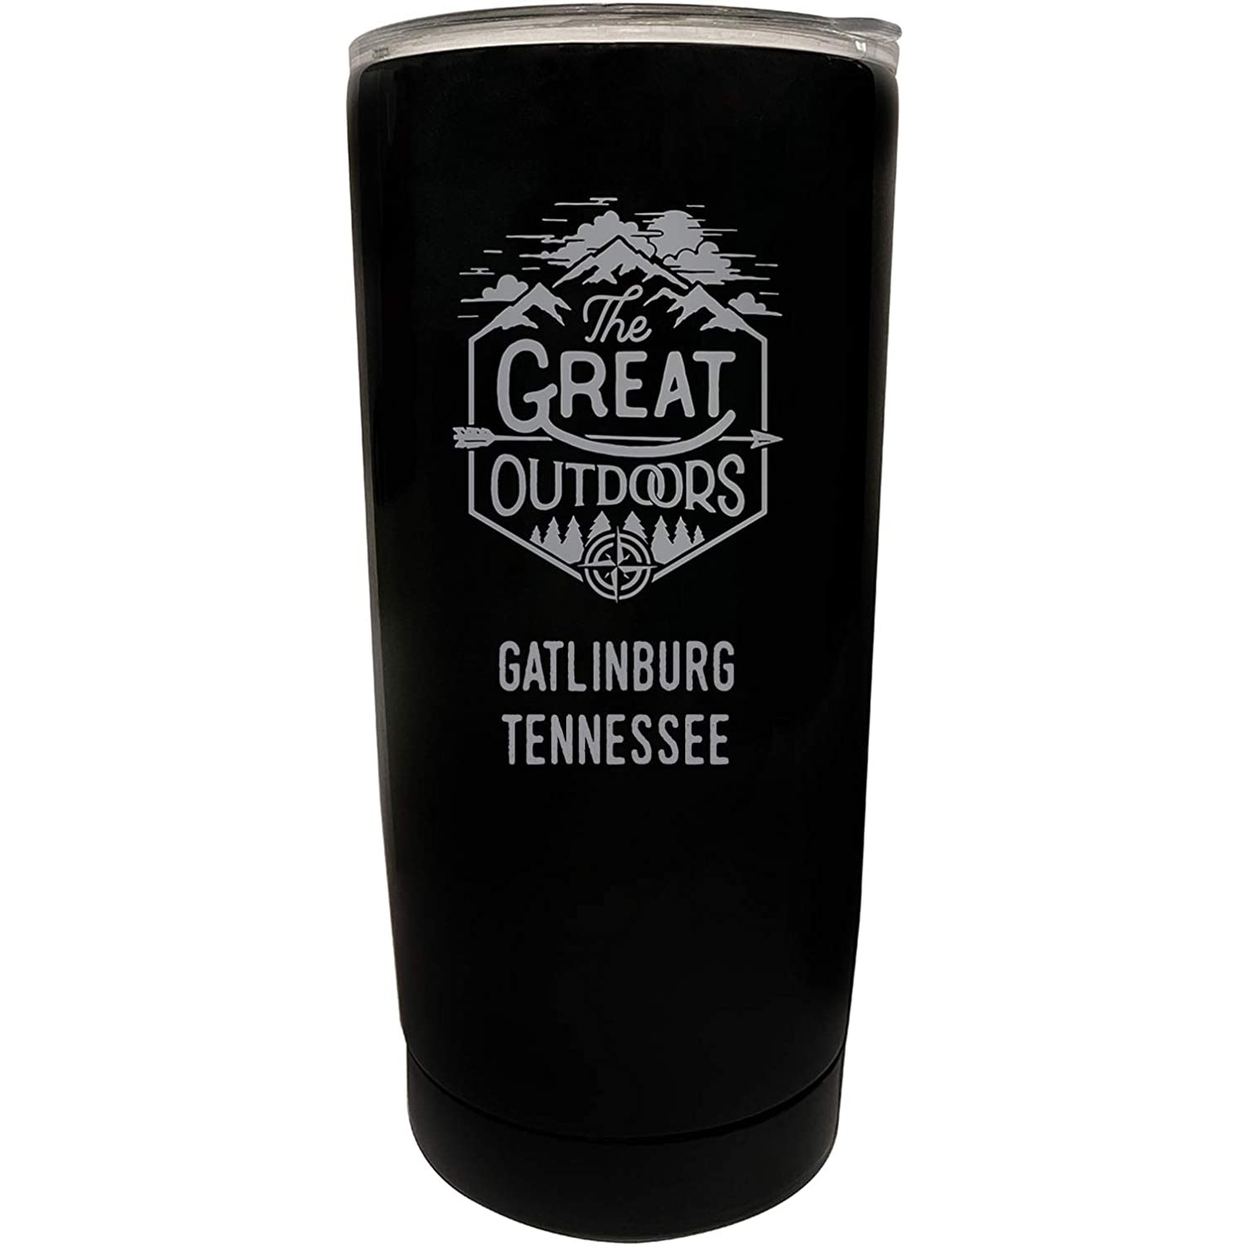 Gatlinburg Tennessee Etched 16 Oz Stainless Steel Insulated Tumbler Outdoor Adventure Design - White